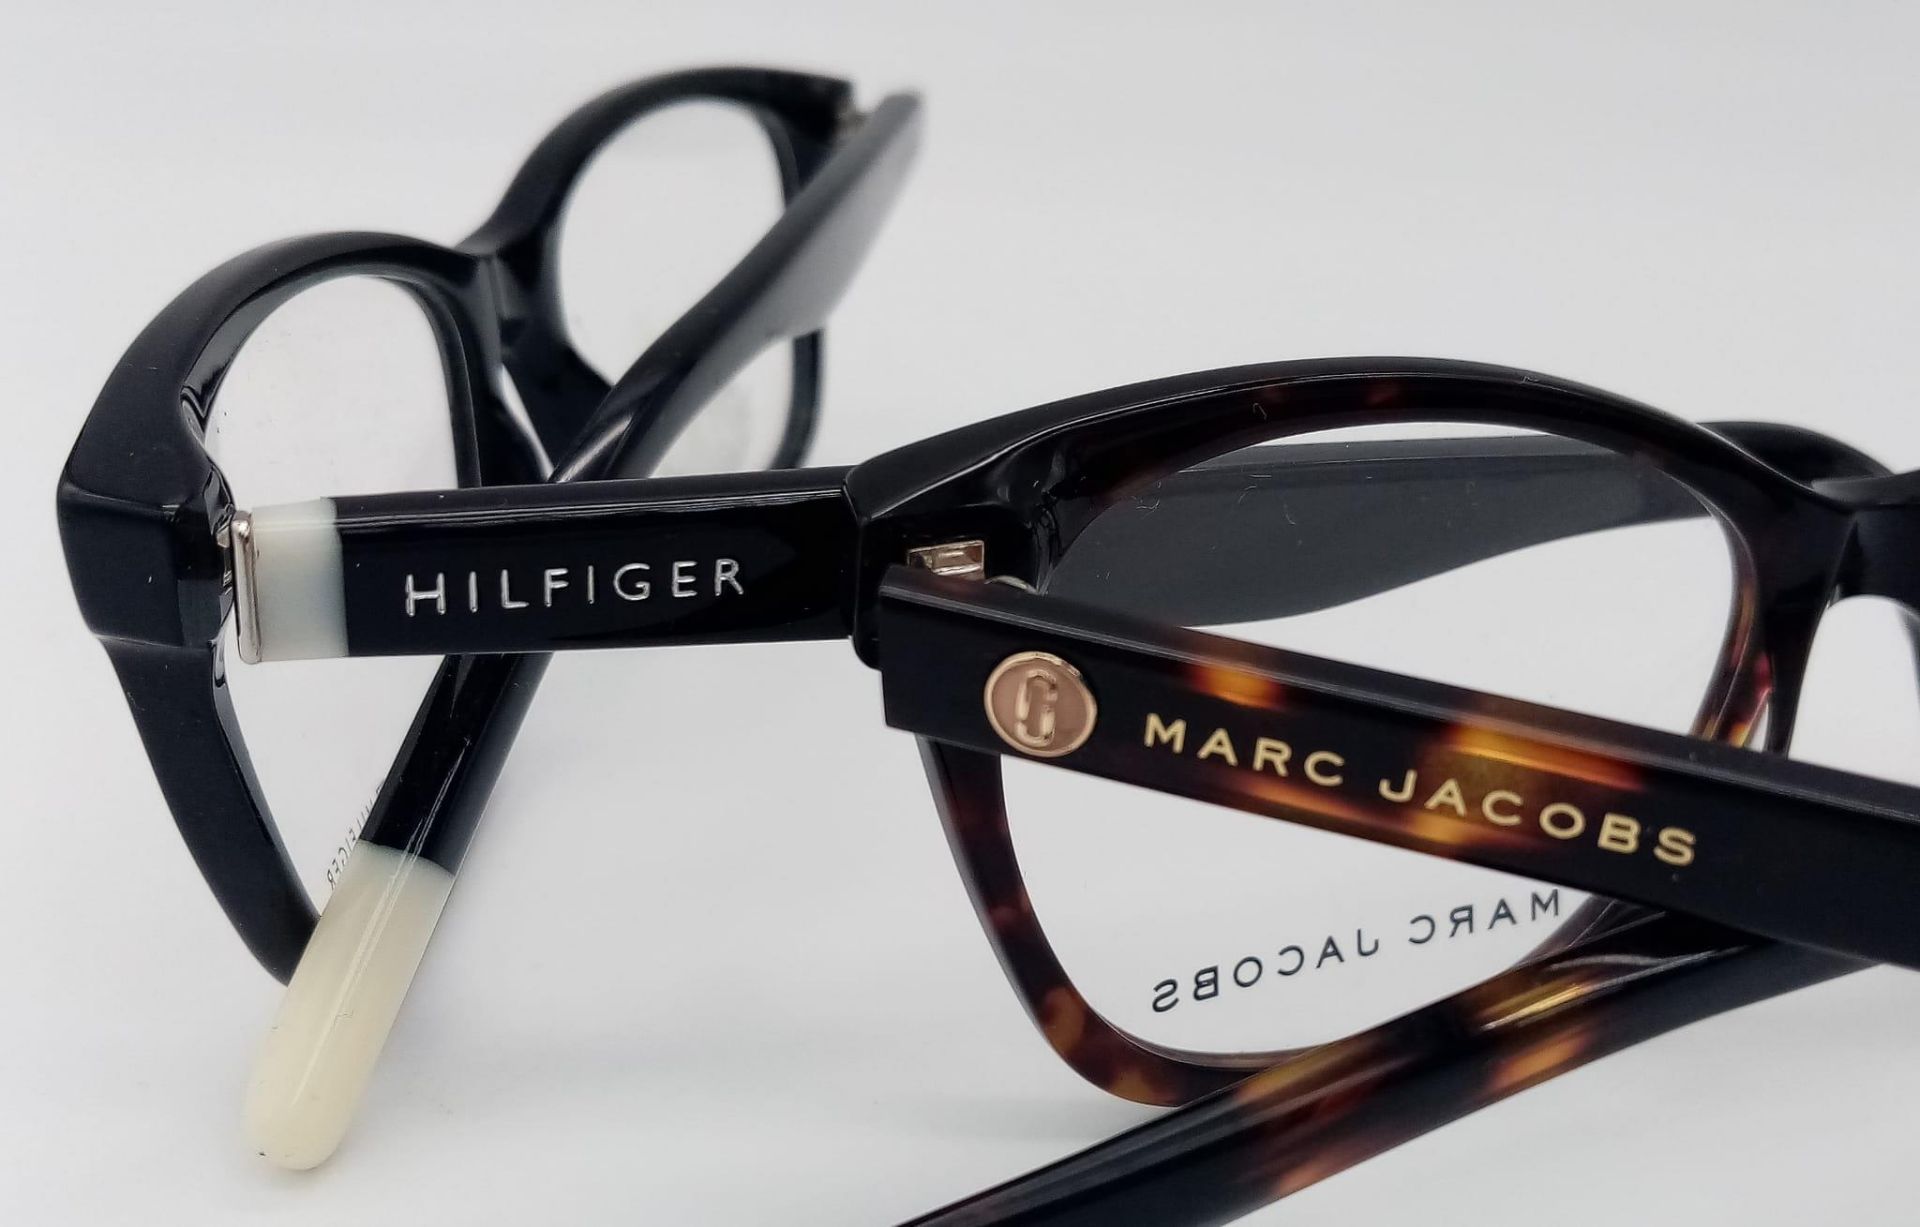 Two Pairs of Designer Glasses - Marc Jacobs and Tommy Hilfiger. - Image 3 of 6